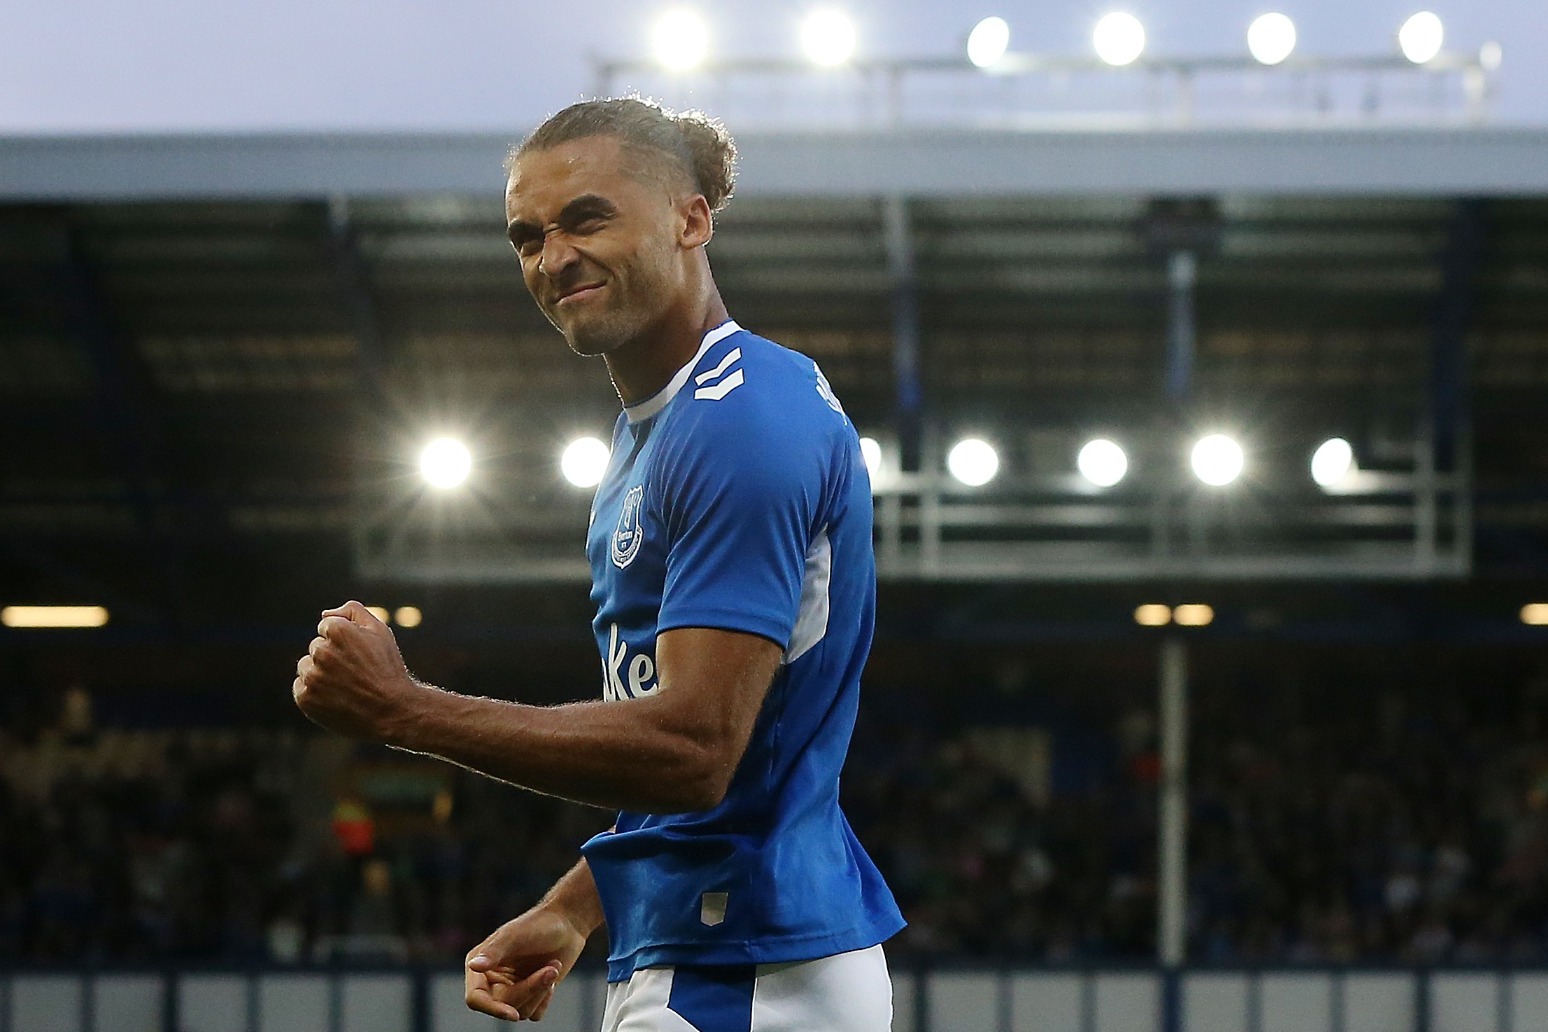 Dominic Calvert-Lewin can make it into England’s World Cup squad – Frank Lampard 